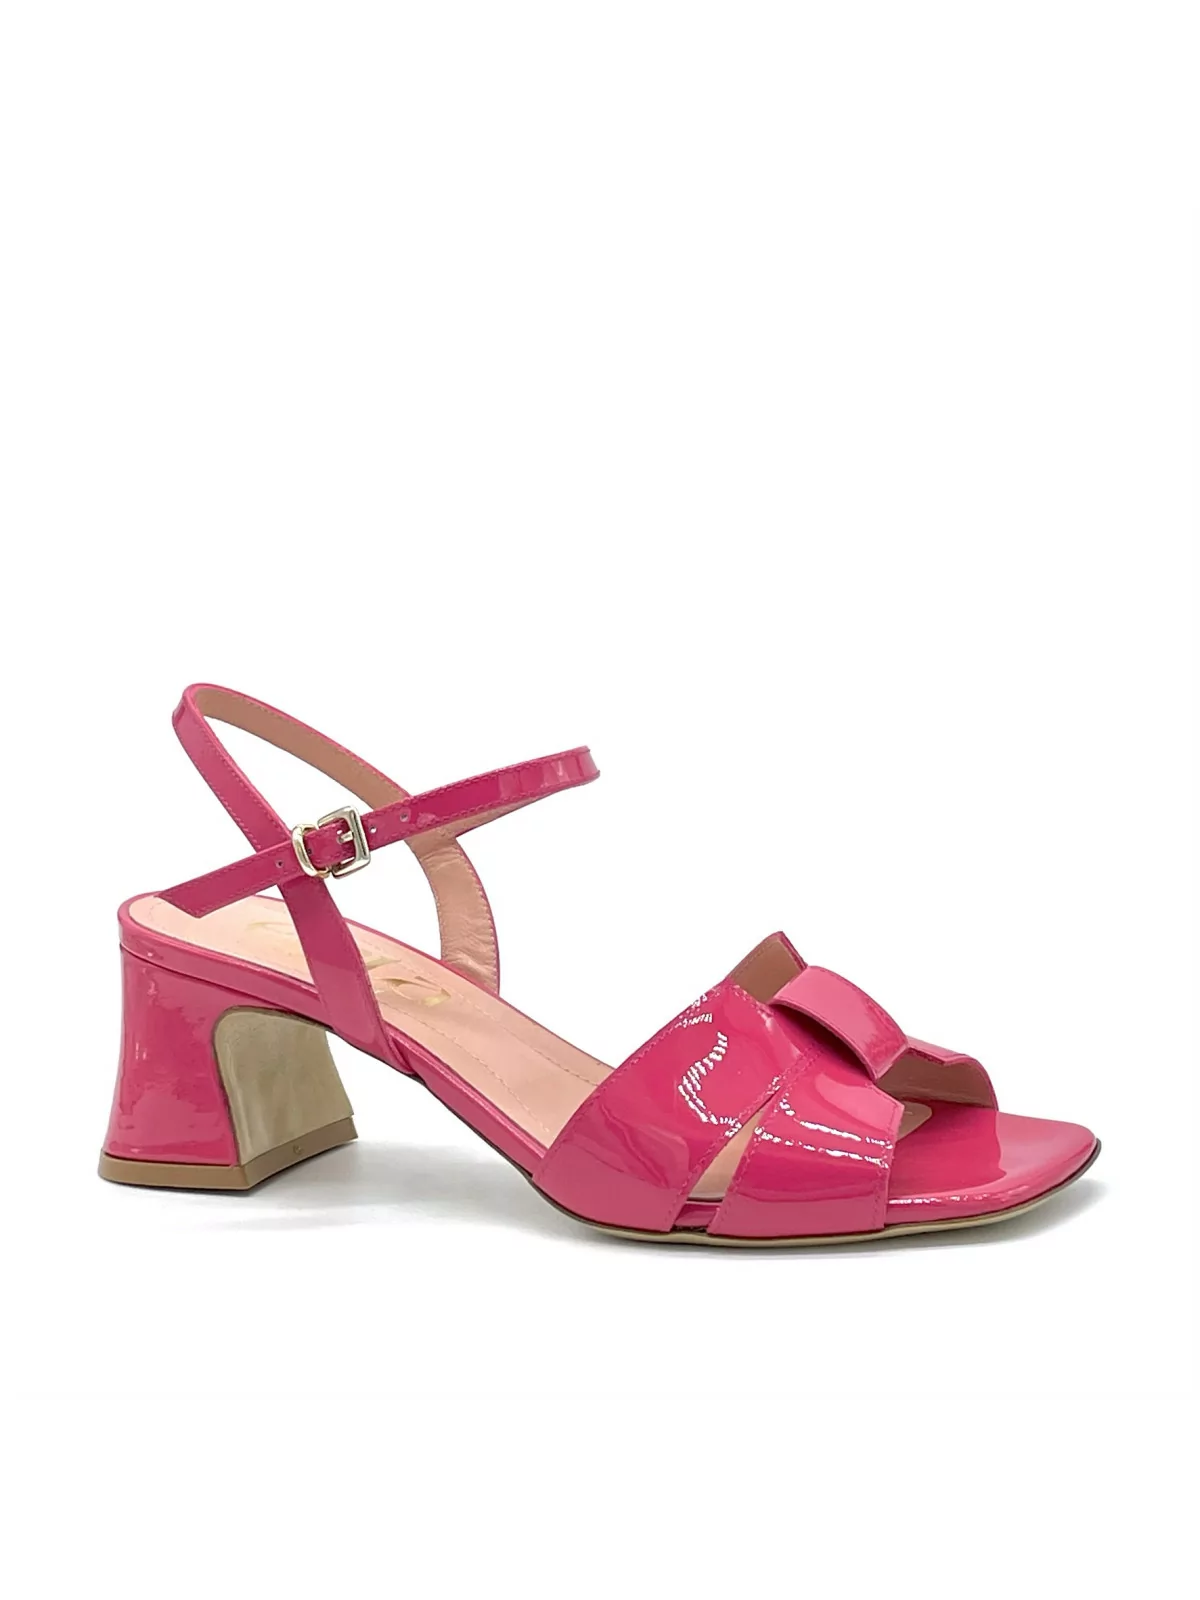 Raspberry colored patent sandal. Leather lining, leather sole. 5,5 cm heel.